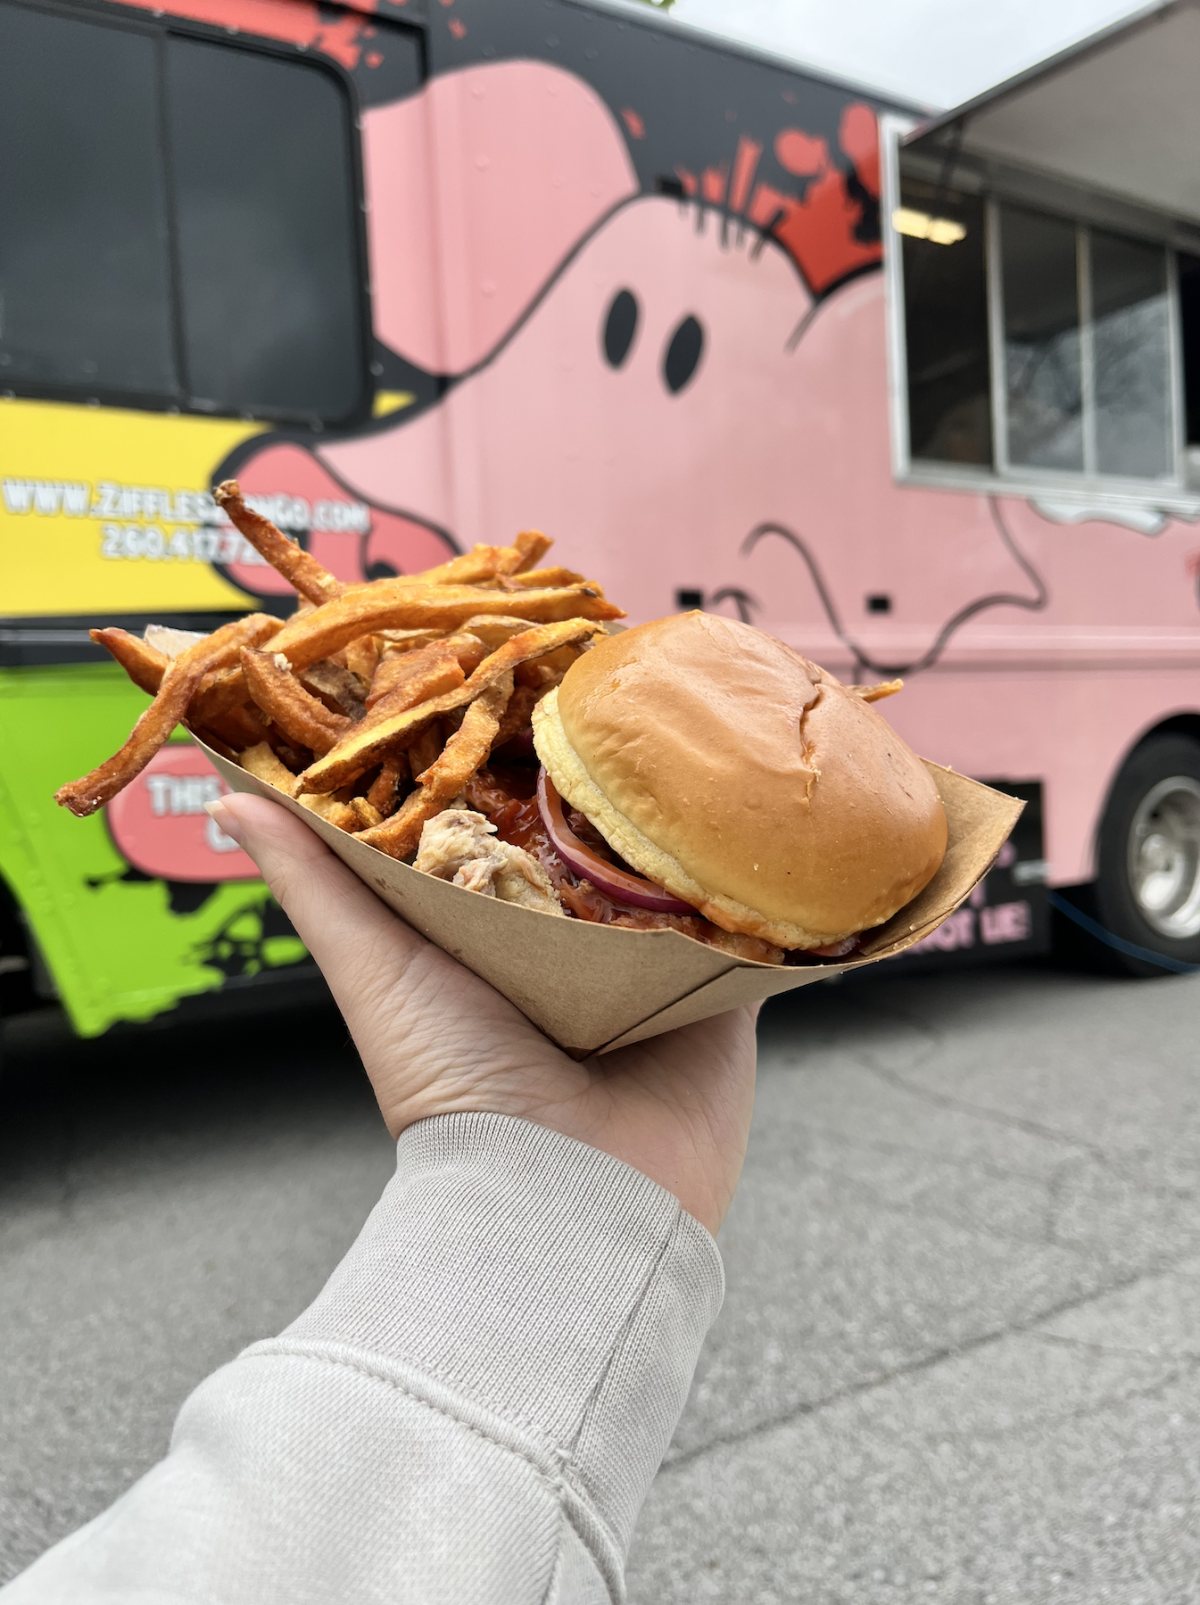 Ziffles zip n' go food truck with a pulled pork sandwich